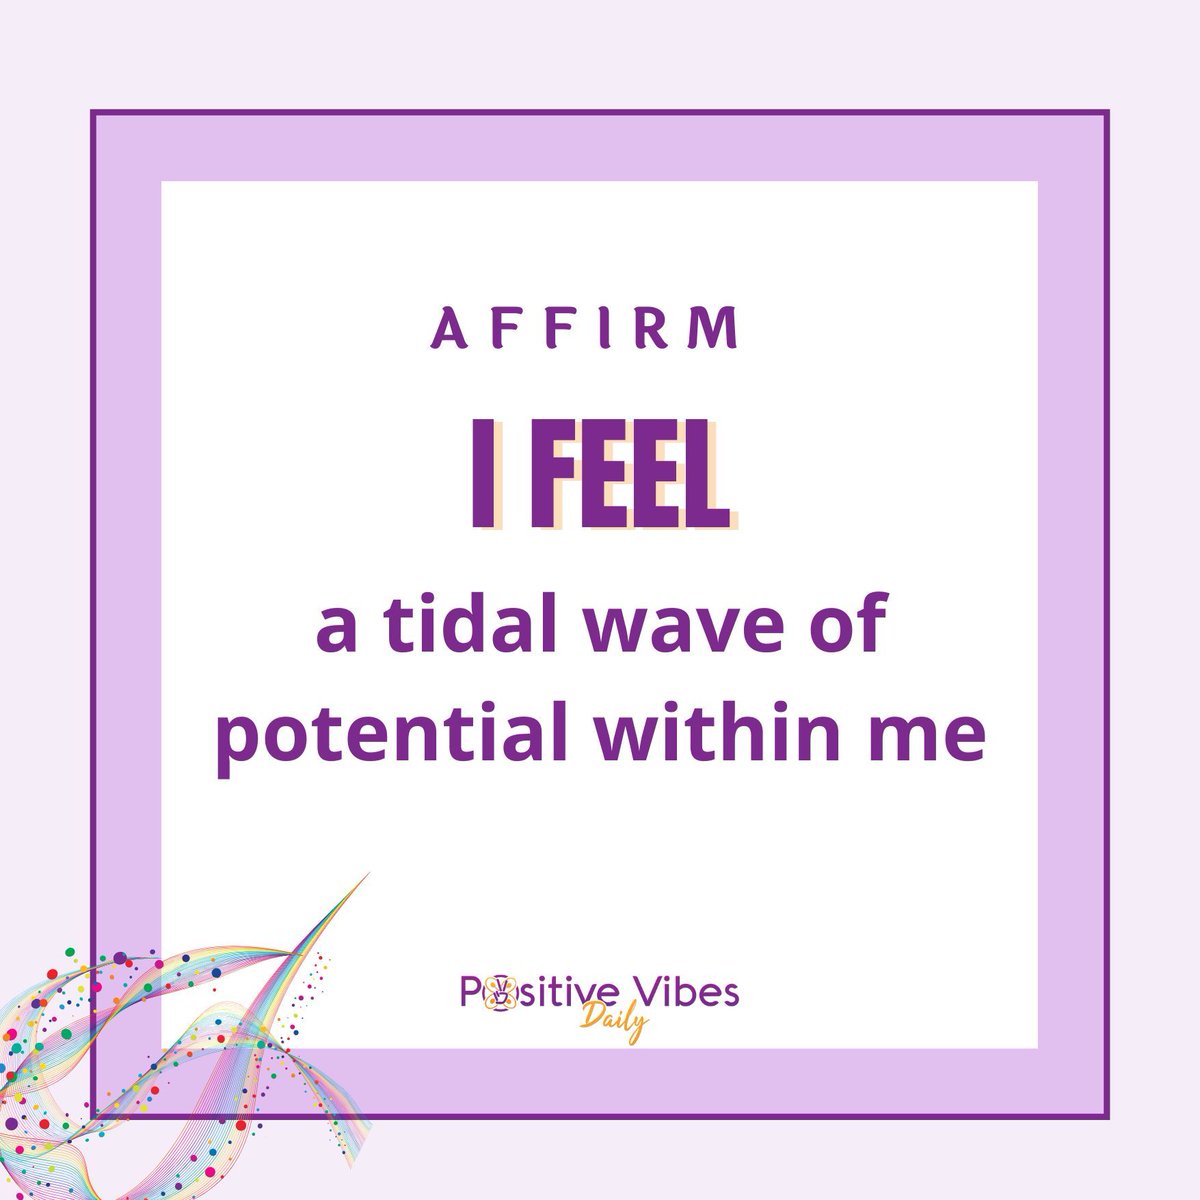 Riding the tidal wave of potential within, ready to surge forward and make waves. #PositiveVibesDaily #Potential #TidalWave #SurgeForward #MakeWaves #UnleashedPotential #ReadyToRise #PowerWithin